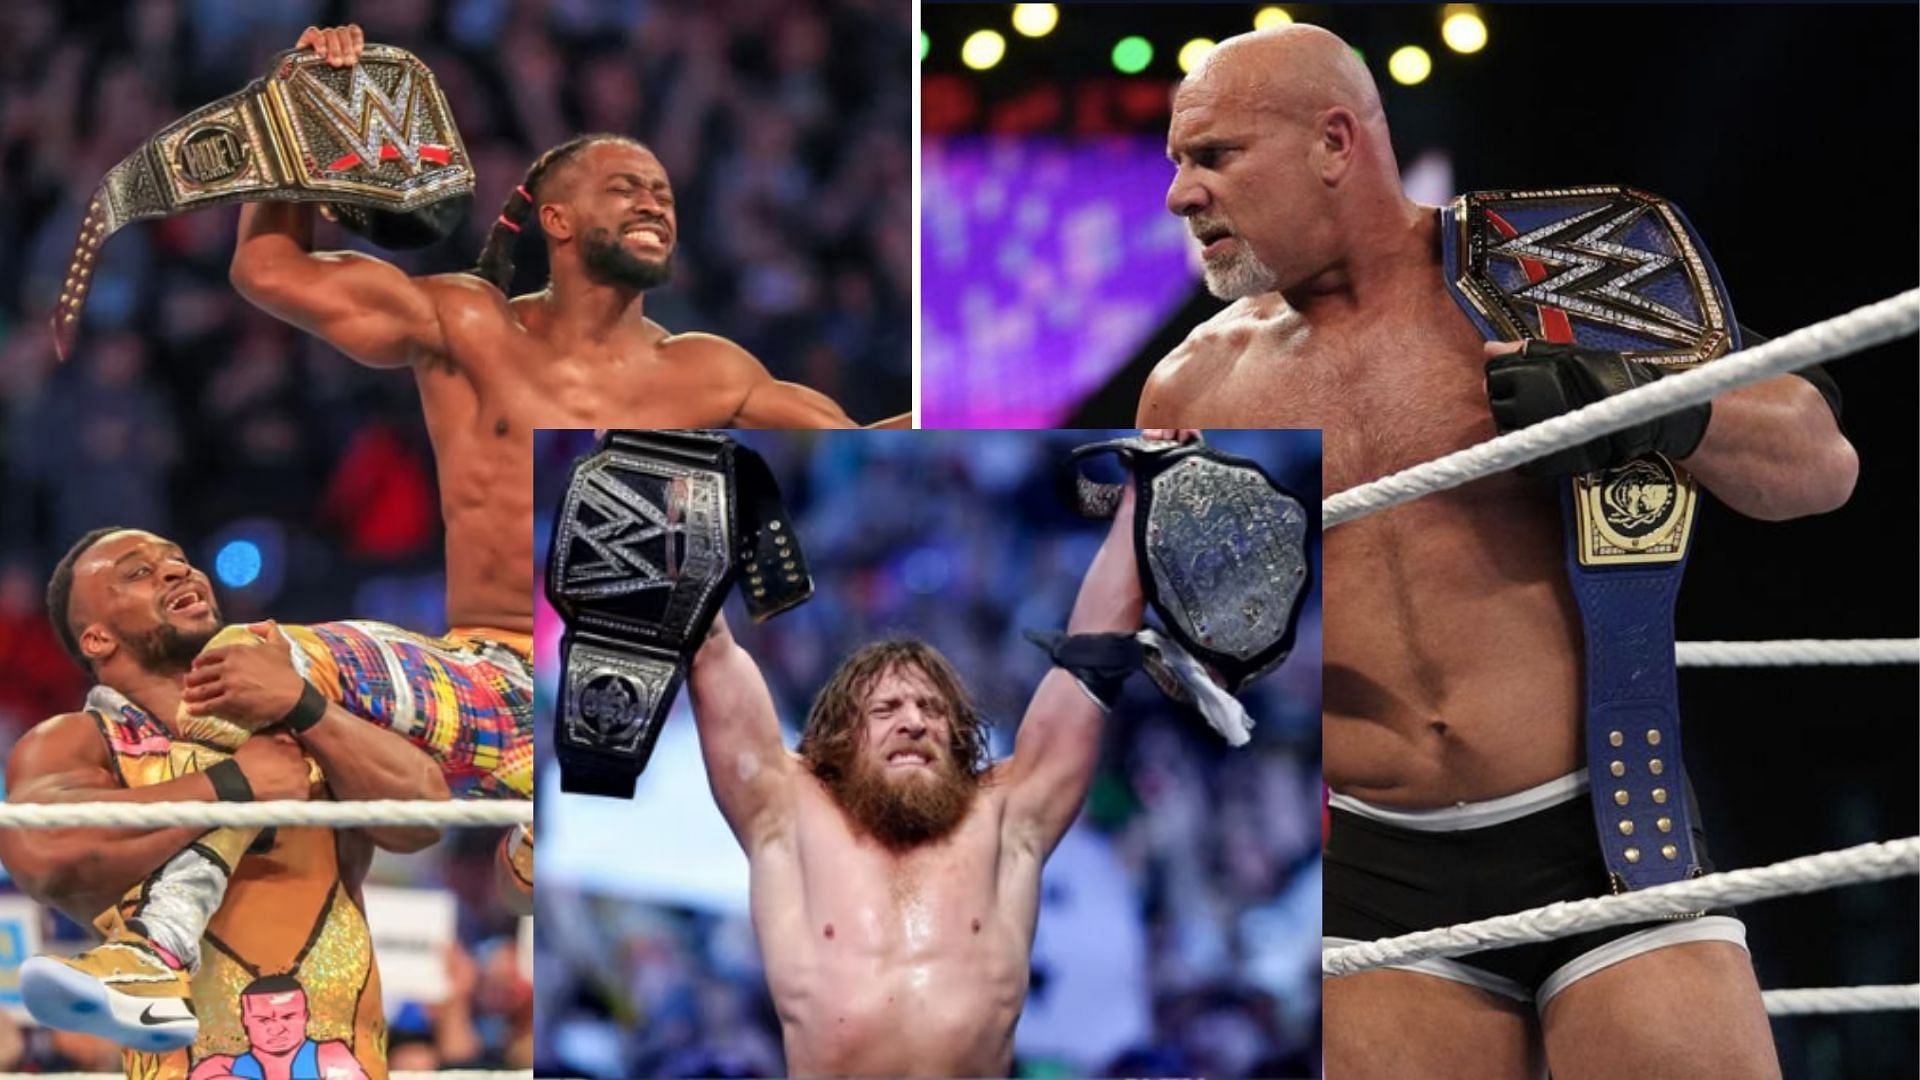 Late change of plans proved fortunate to these WWE Superstars.